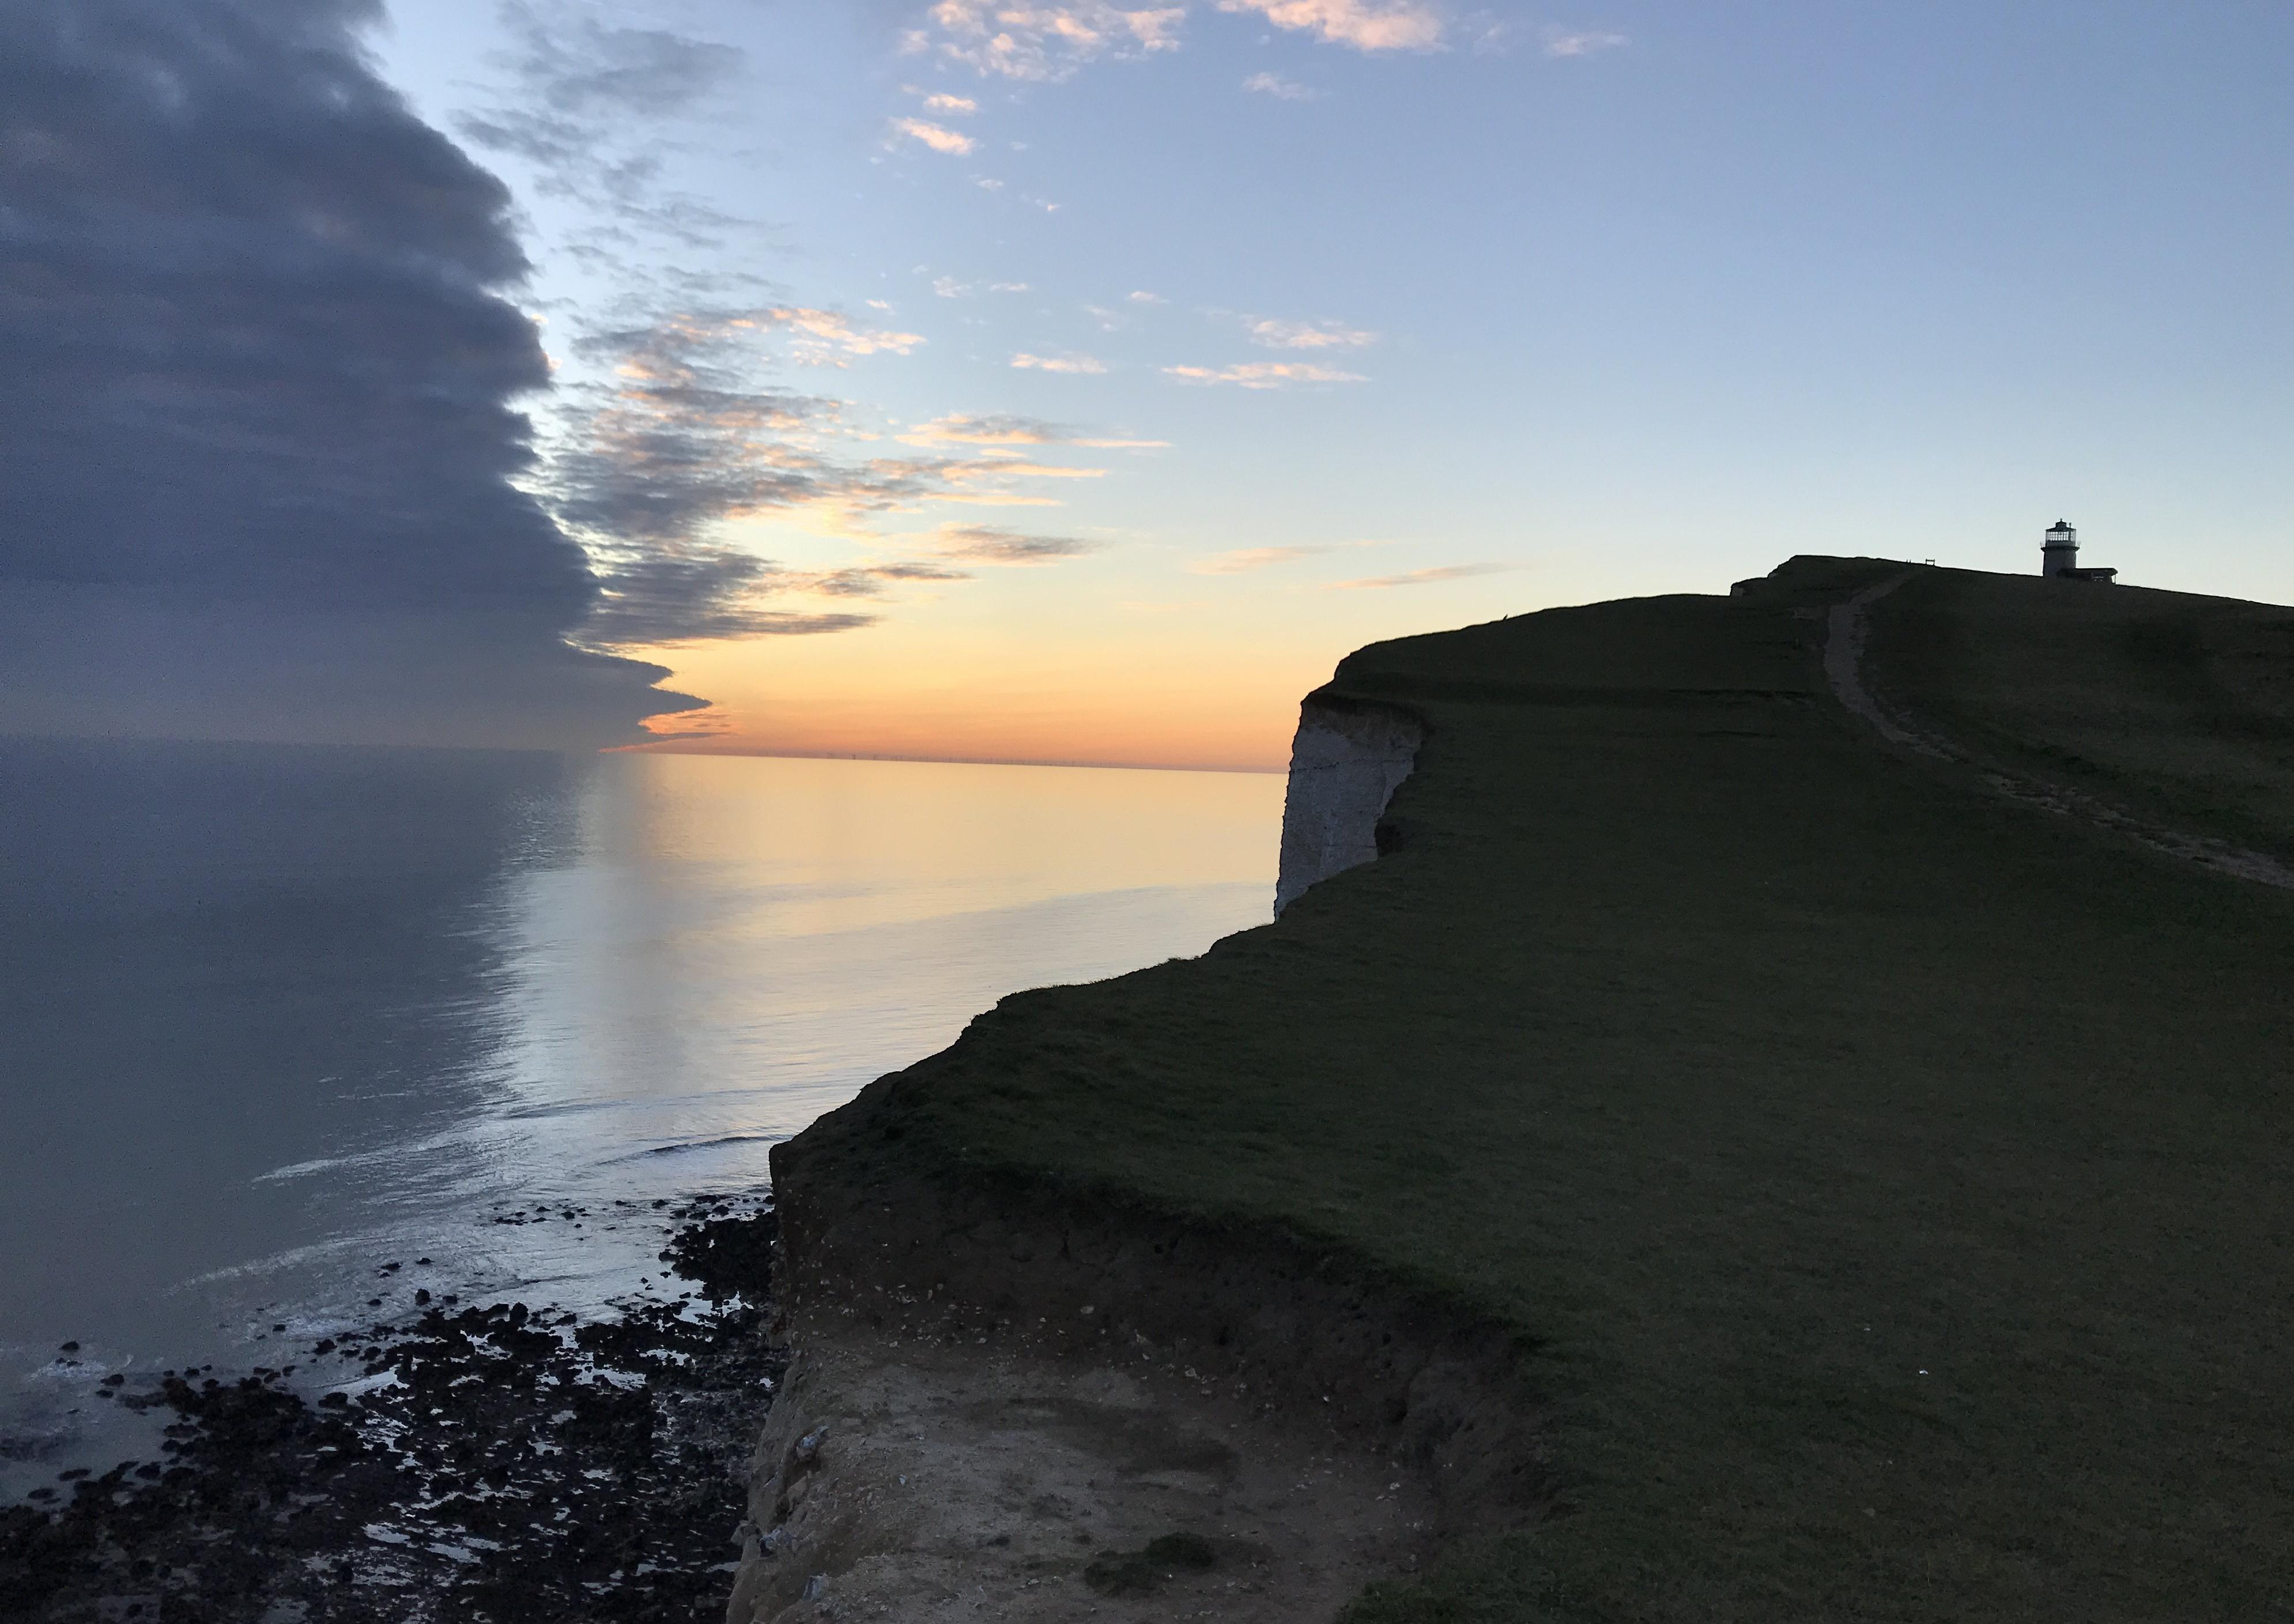 Sunset at Beachy Head, taken by Ray Love with an iPhone SUS-200129-111705001